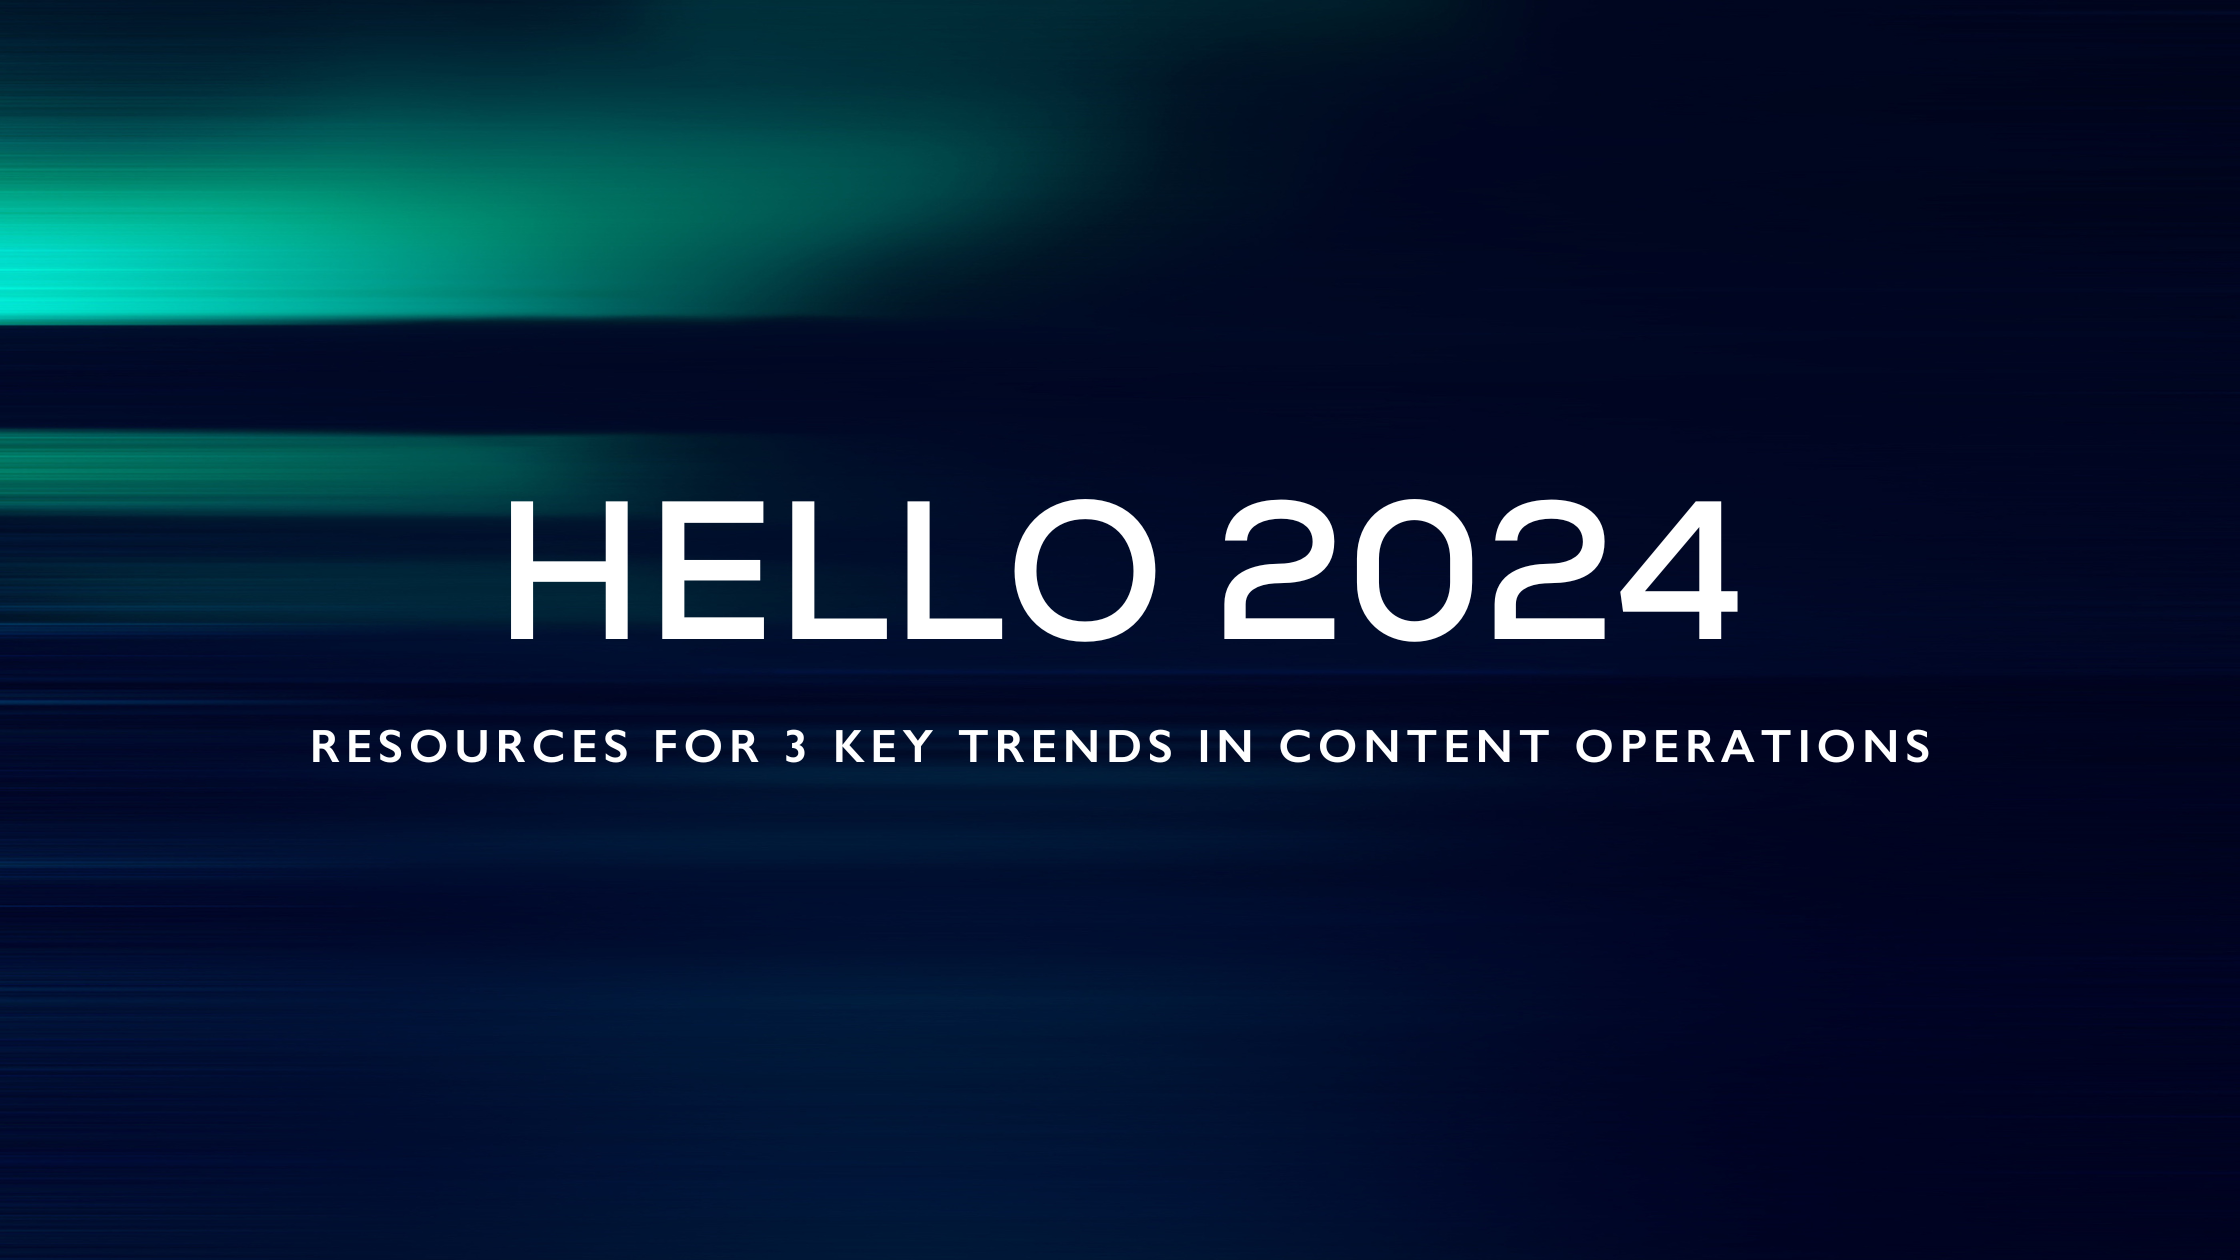 Dark blue background with green and blue partially translucent stripes of varying sizes along the left side. White text centered in the middle says, “Hello 2024: Resources for 3 key trends in content operations”